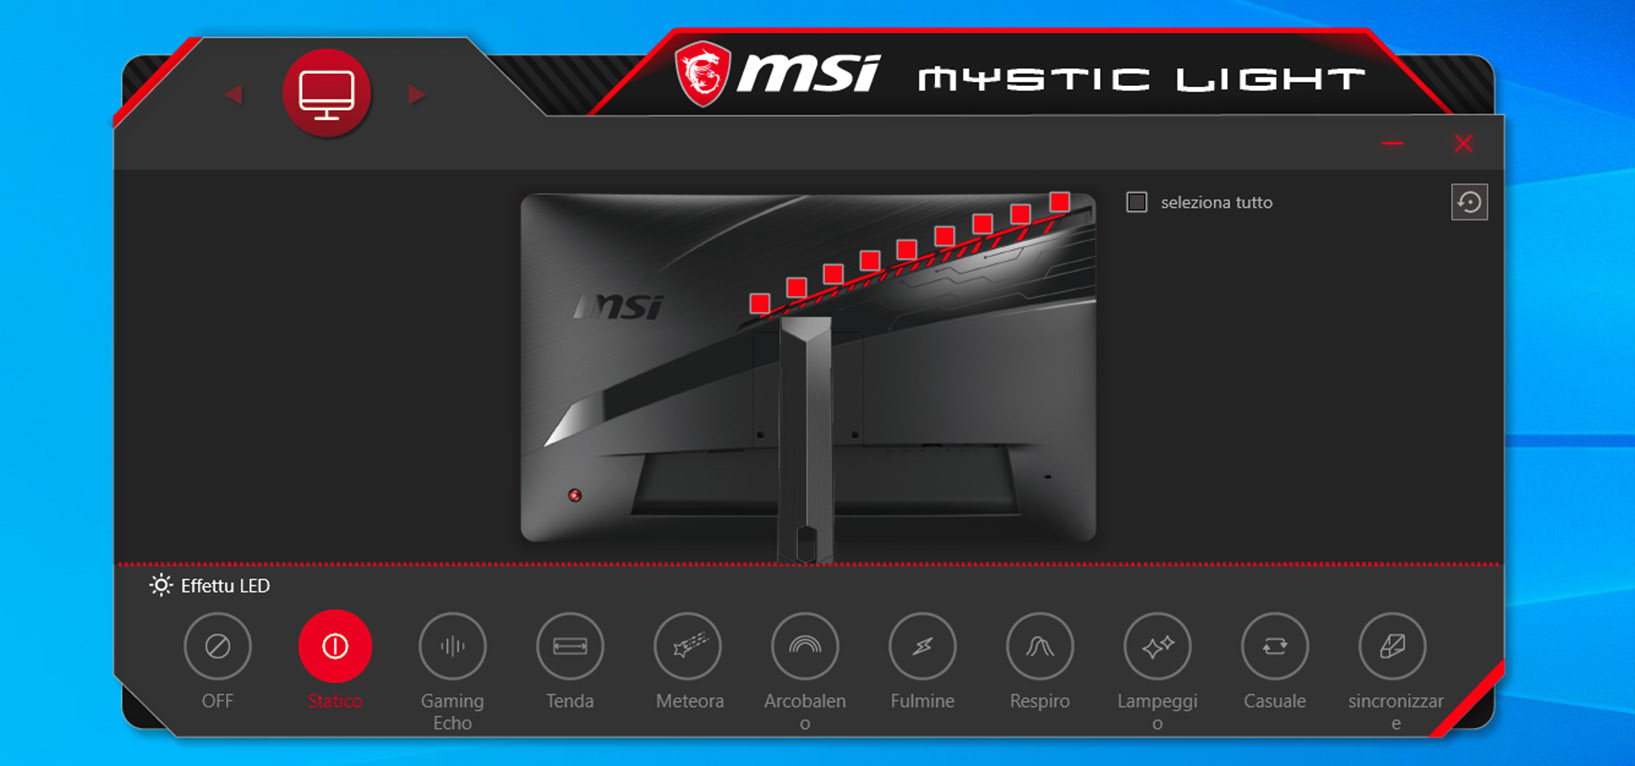 rgb fans compatible with msi mystic light